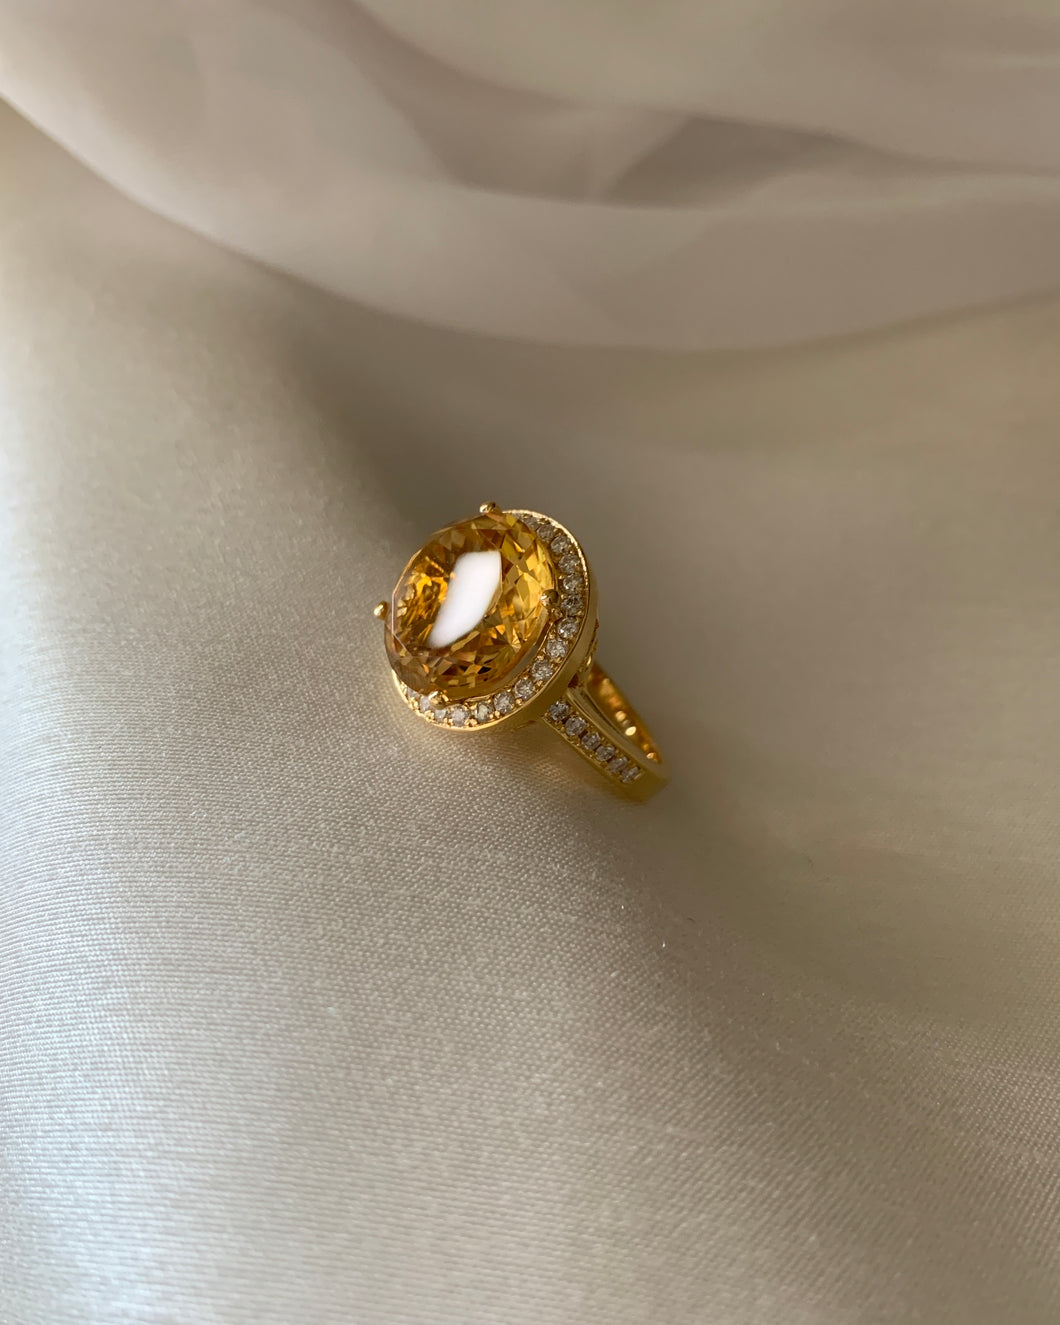 An oval protruded citrine ring in a halo style put together in a moissanites band. Set in yellow gold.